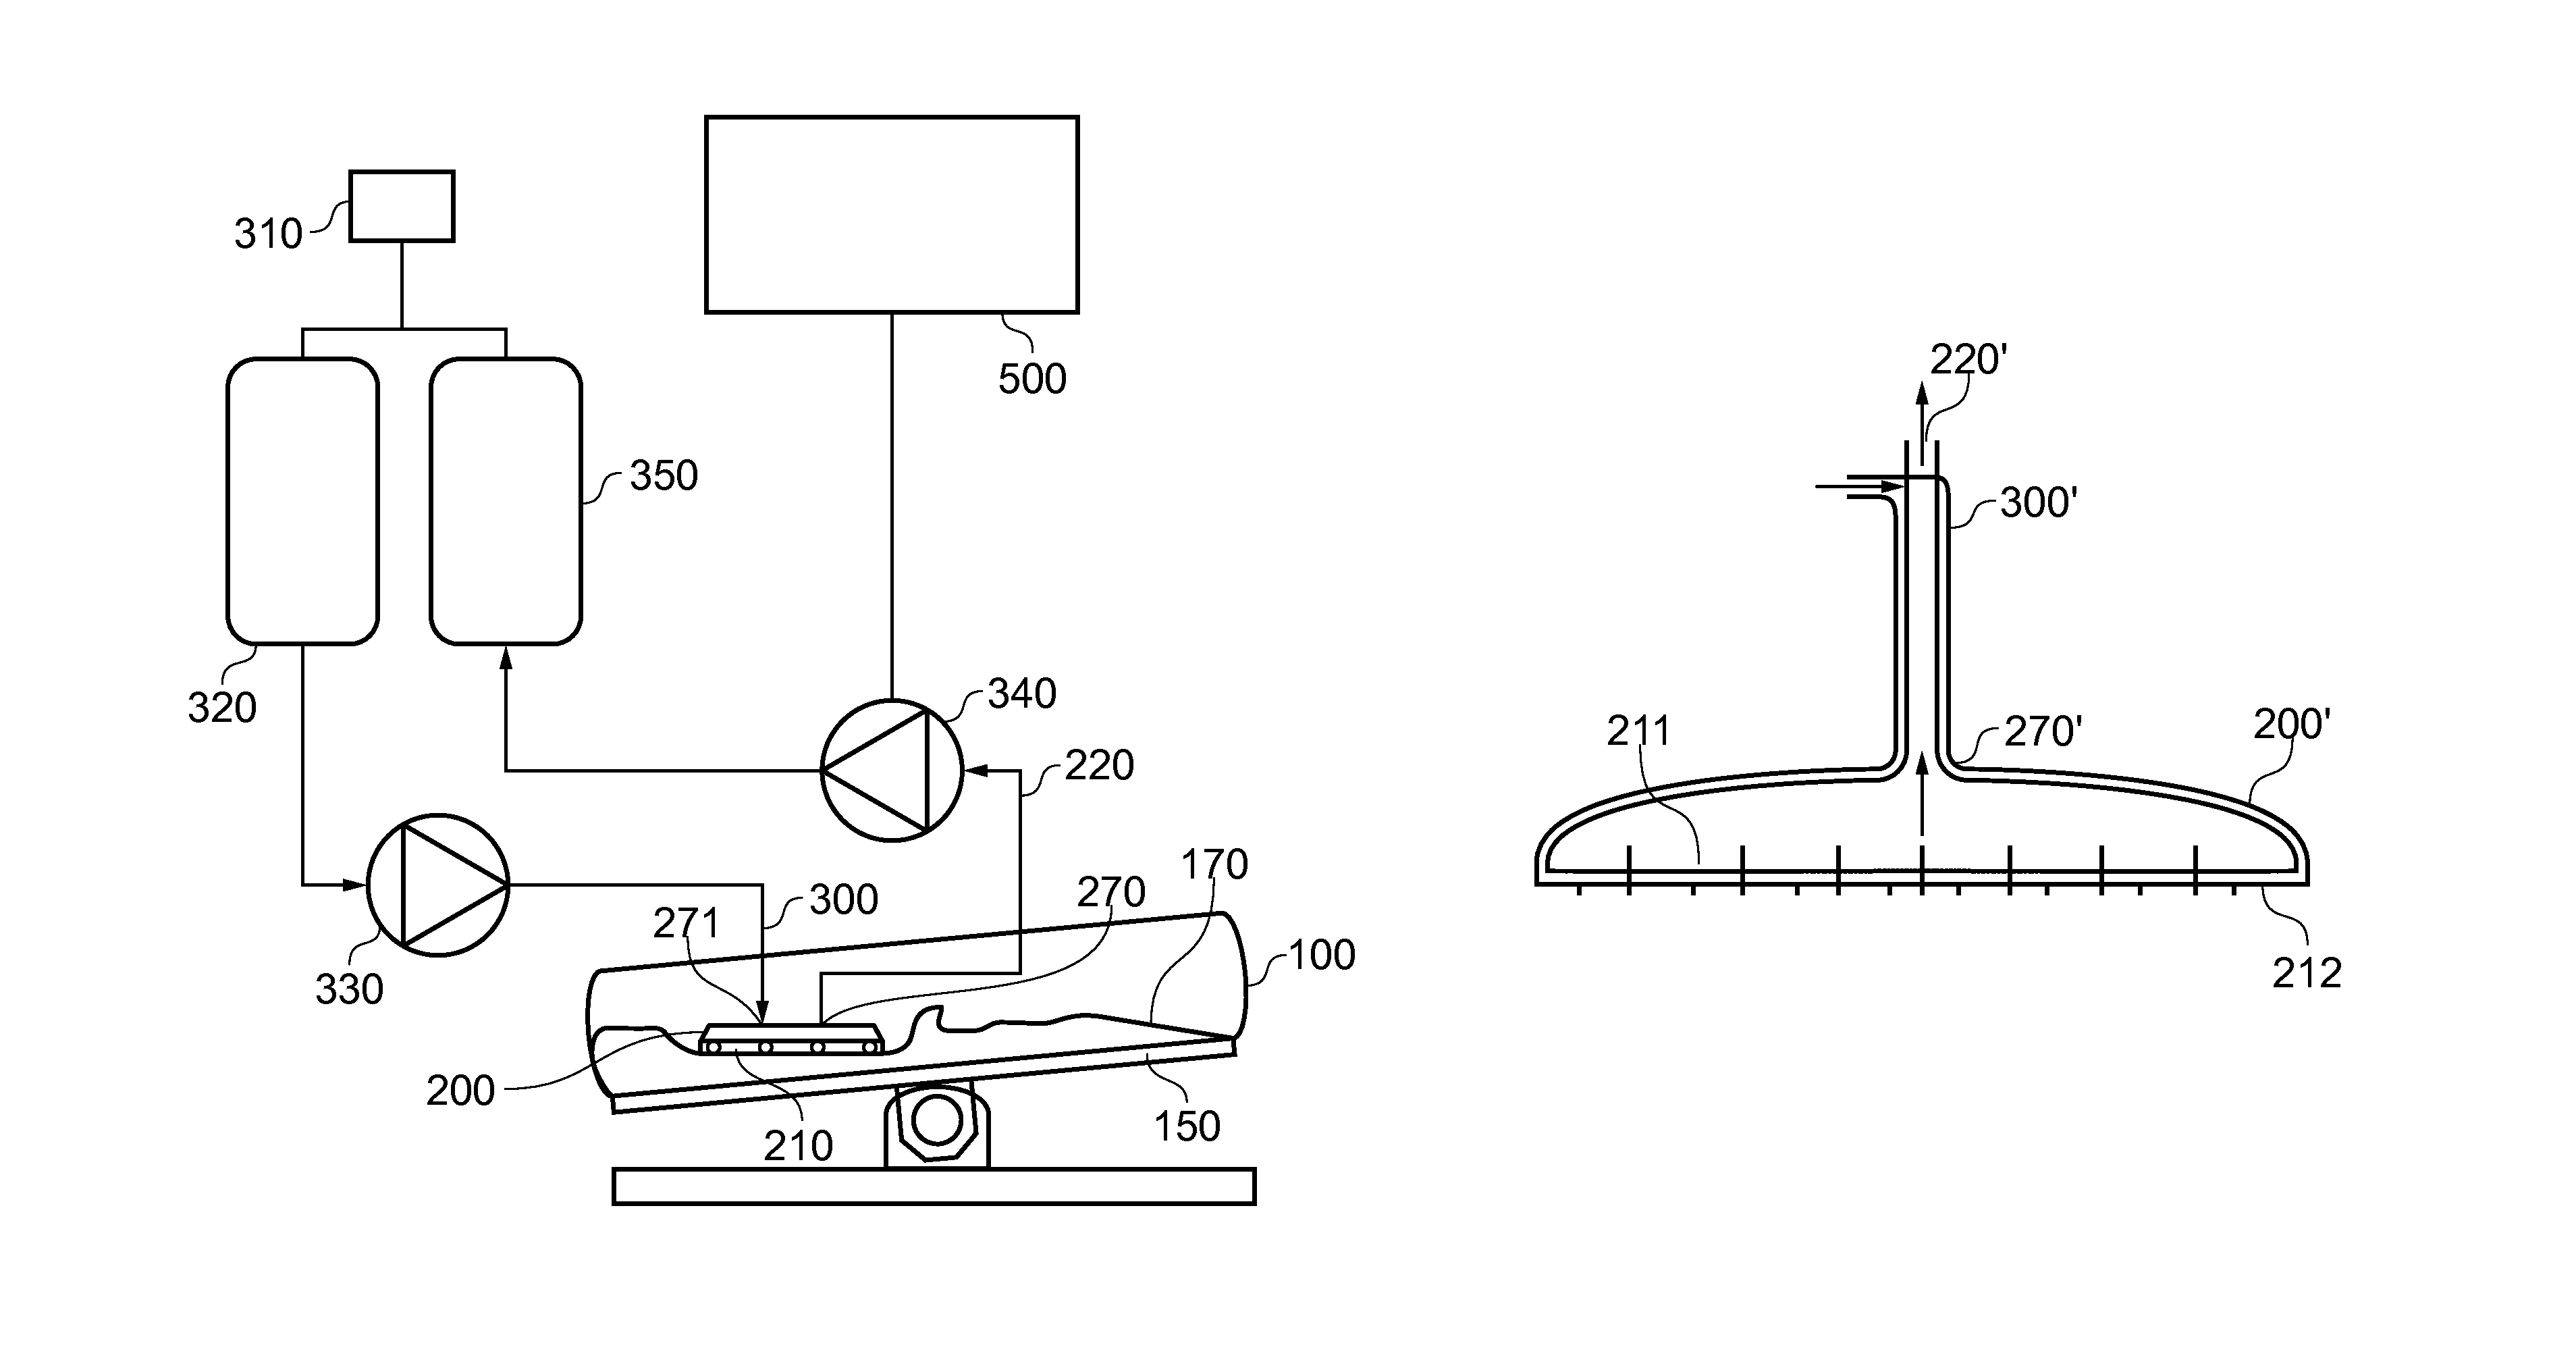 Bioreactor with feed and harvest flow through filter assembly